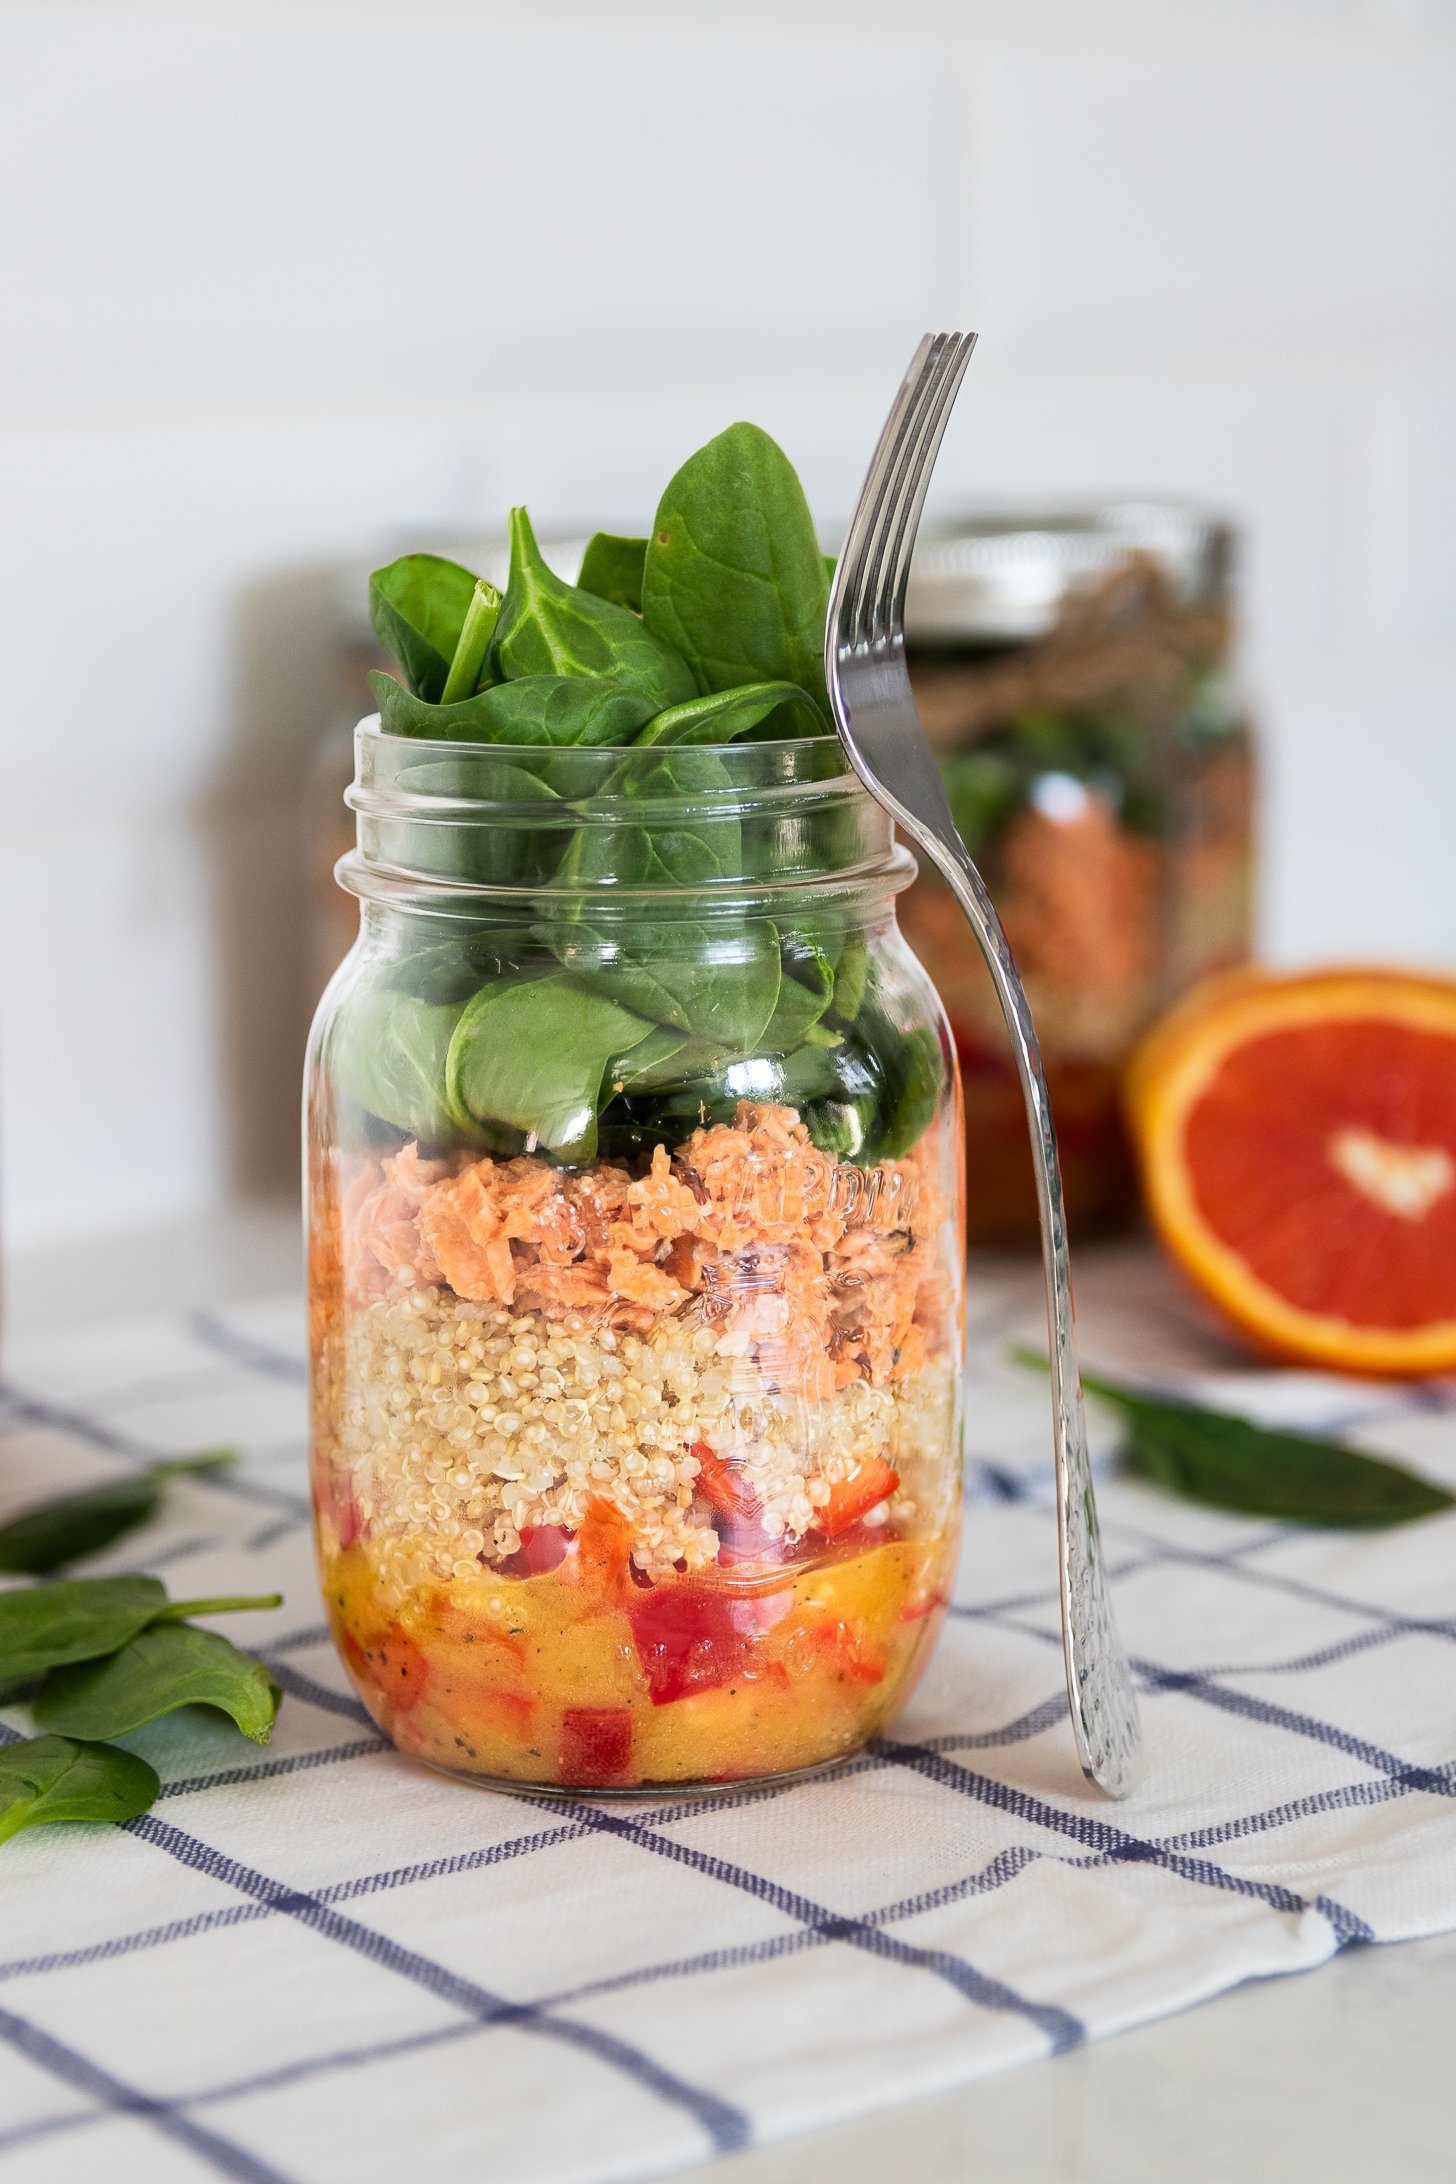 A colourful layered mason jar salad with peppers, quinoa, canned salmon, and spinach leaves on top, with a fork leaning on the jar.